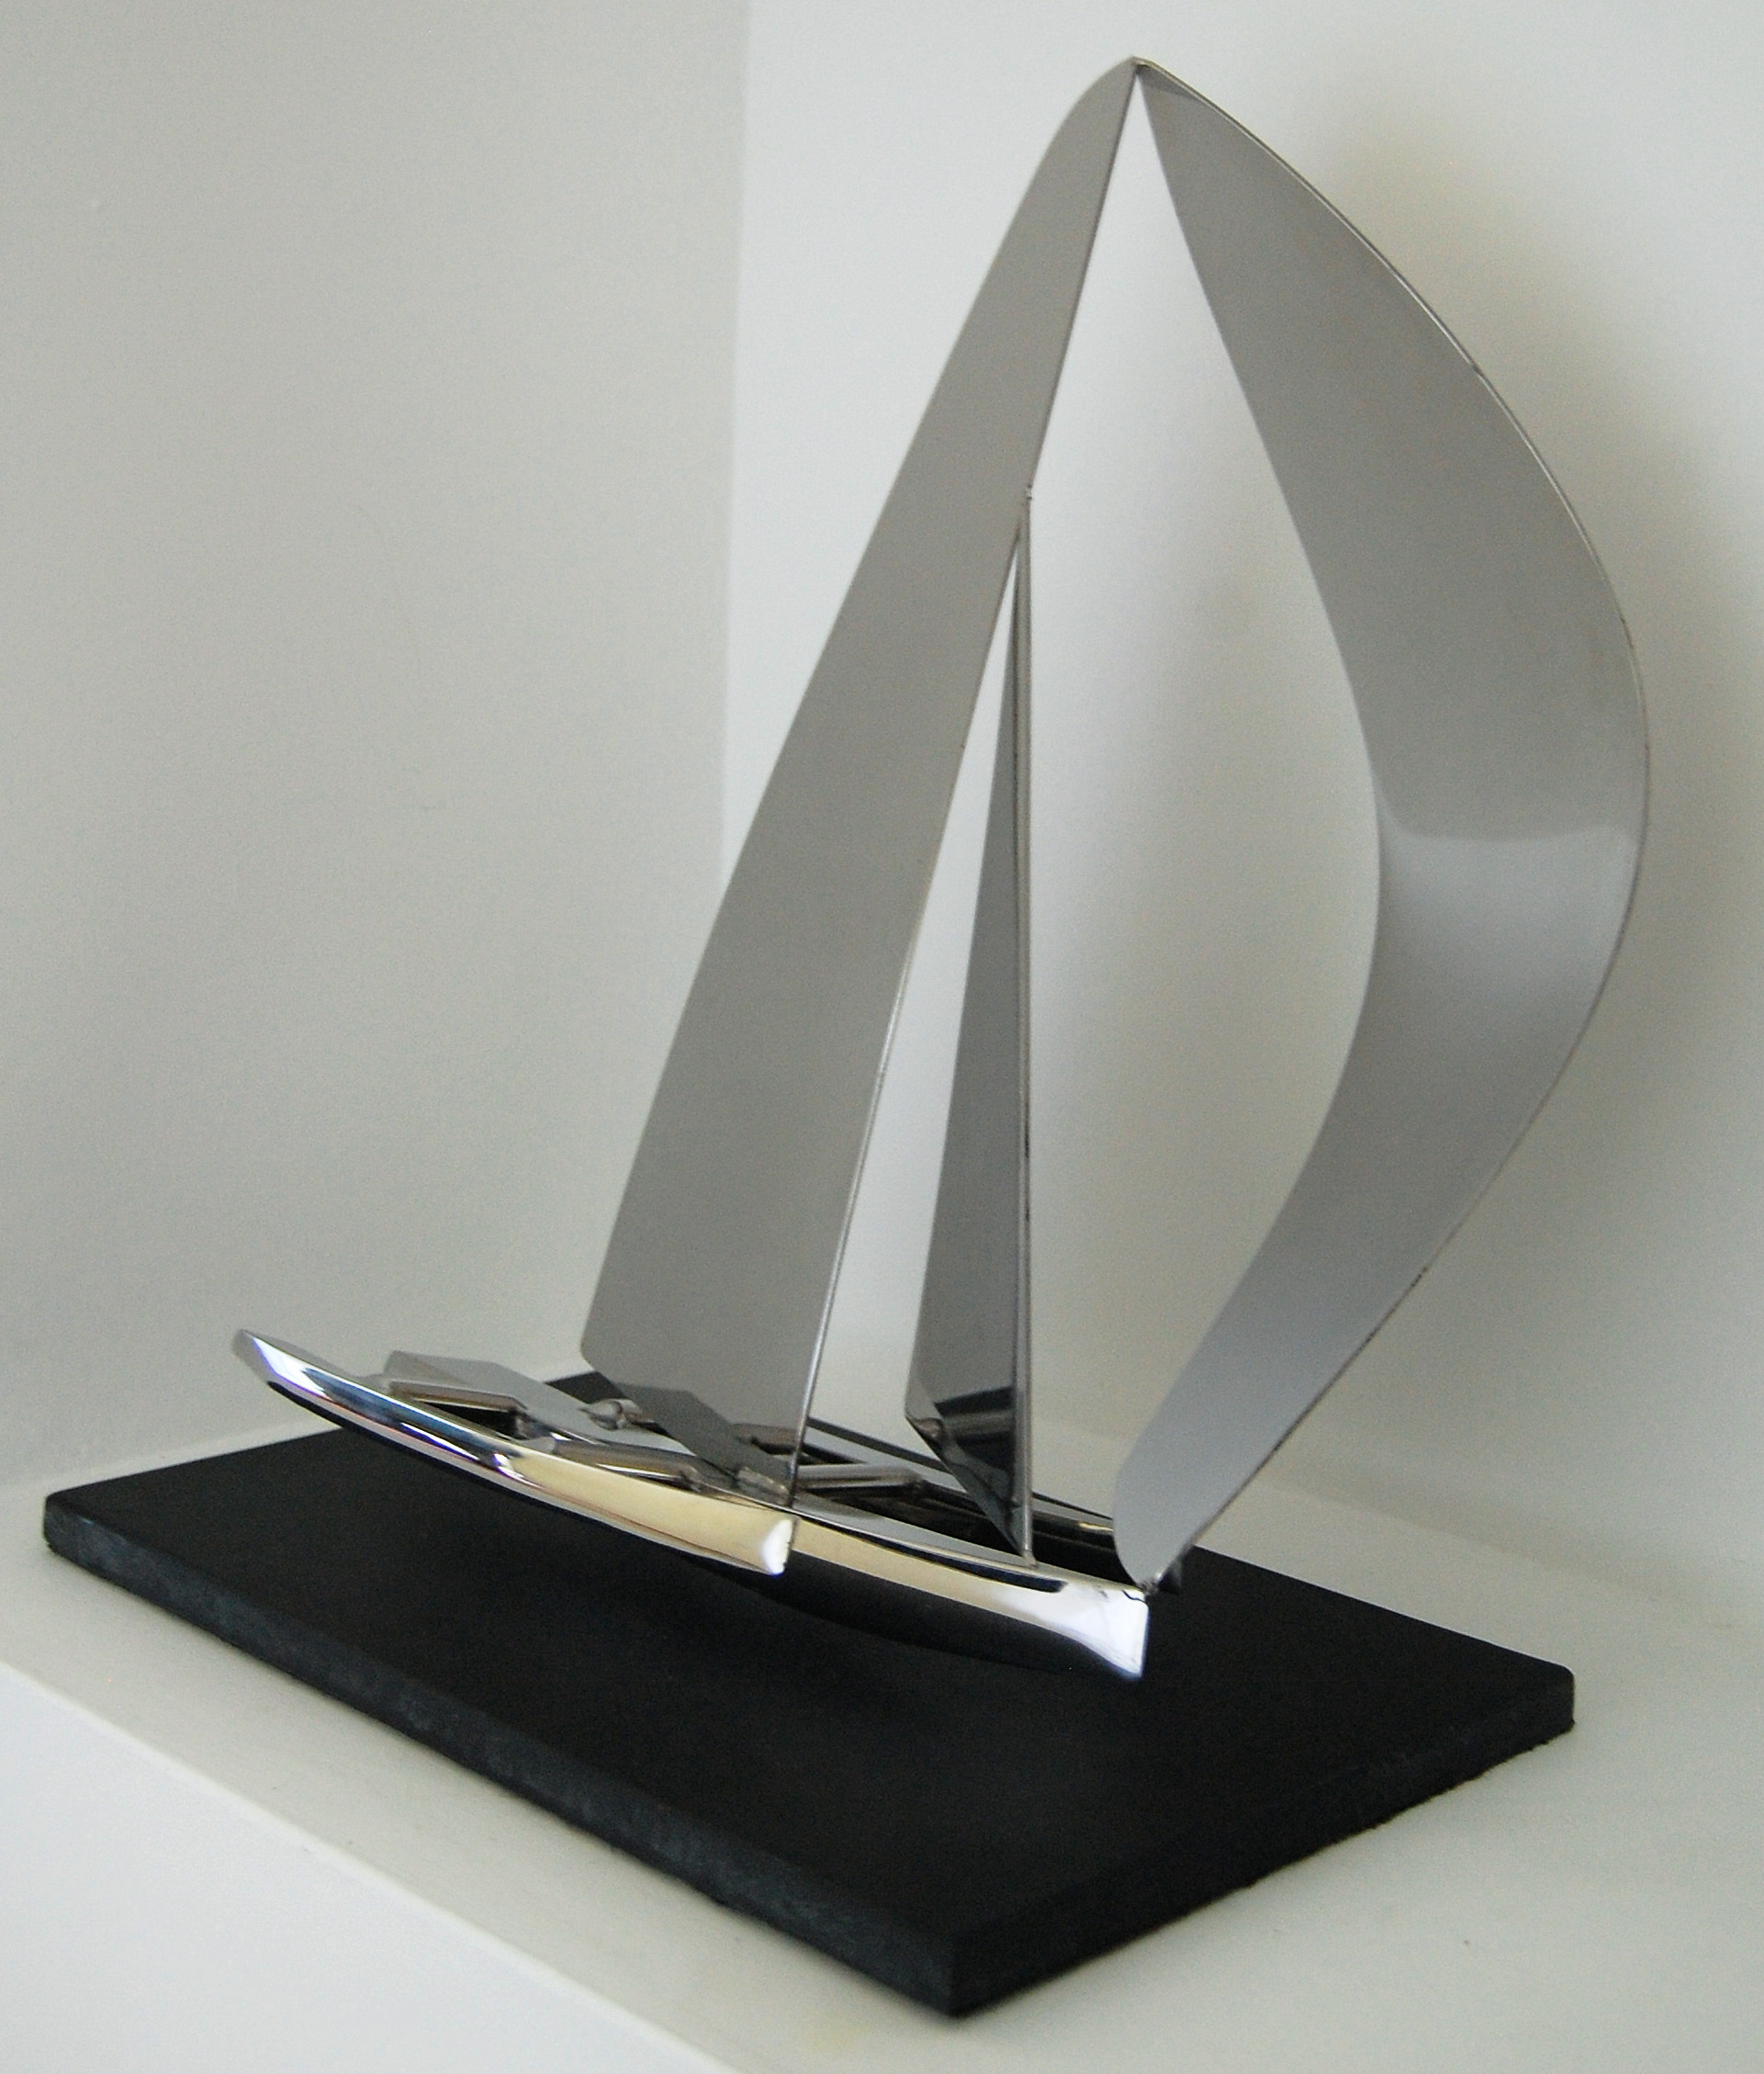 This Trimaran sculpture is handmade in stainless steel and mounted on a slate base. POA